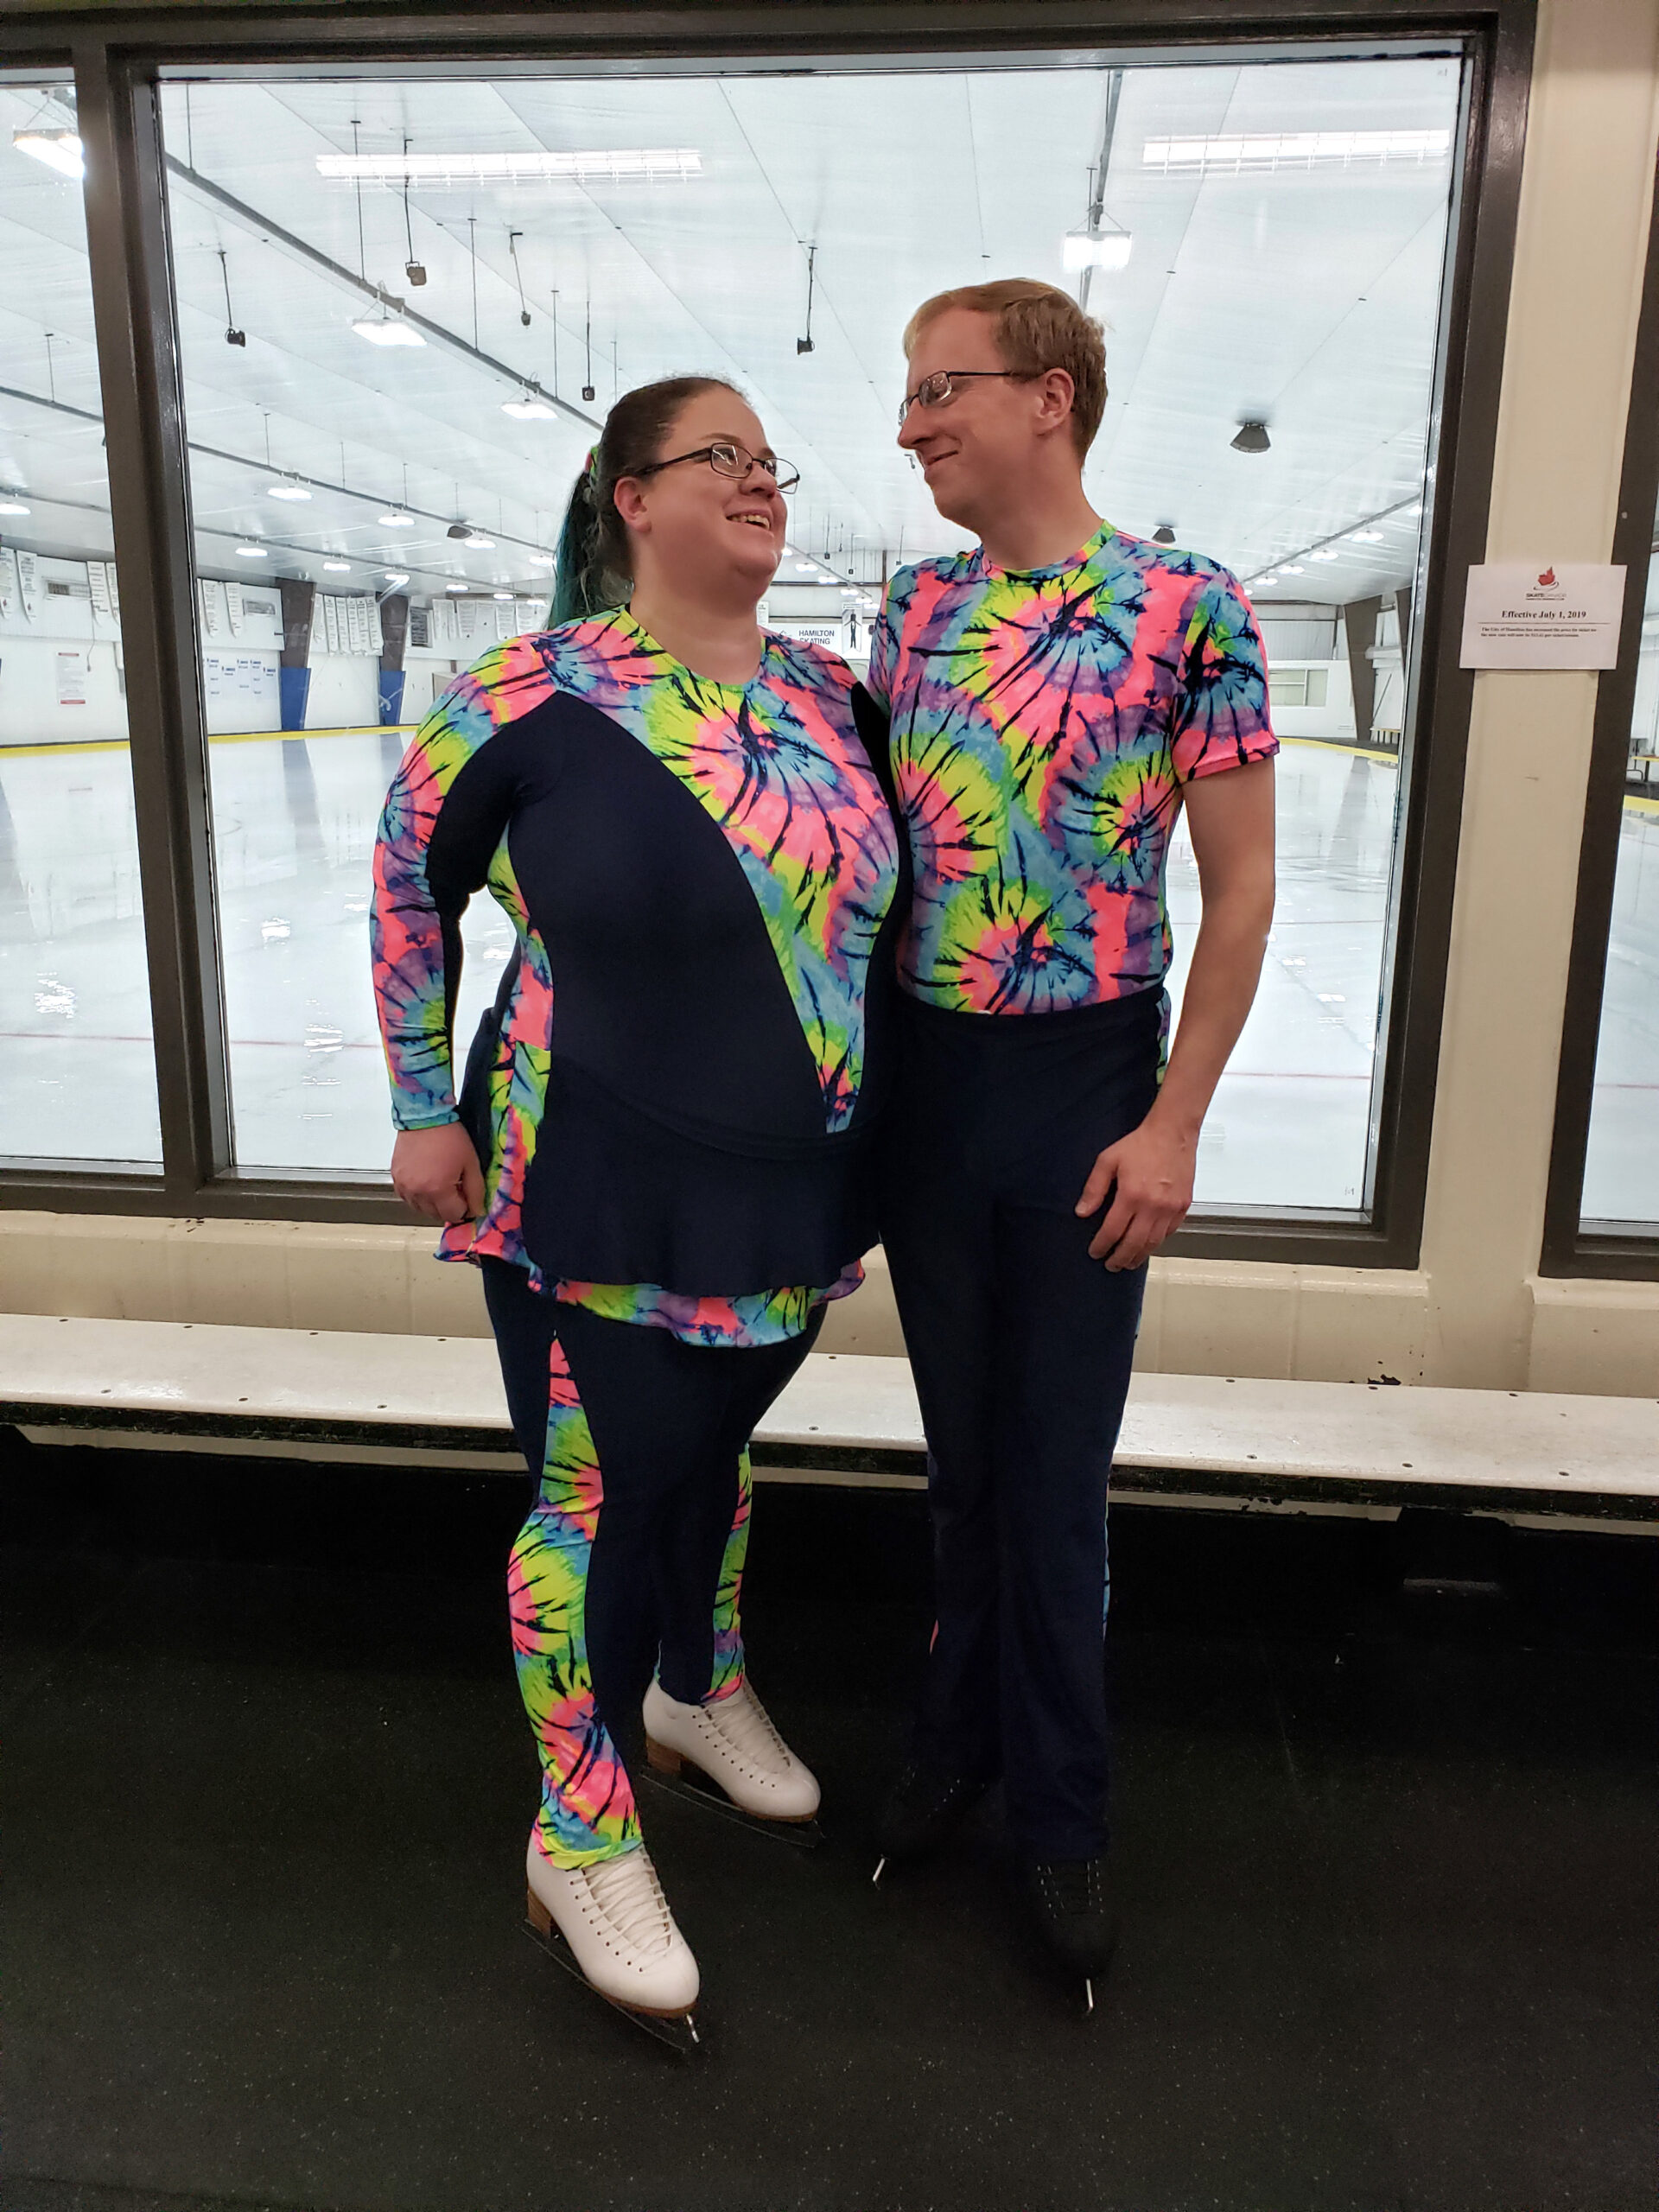 A middle aged couple in bright neon tie-dye skating costumes smiling at each other with a rink in the background.